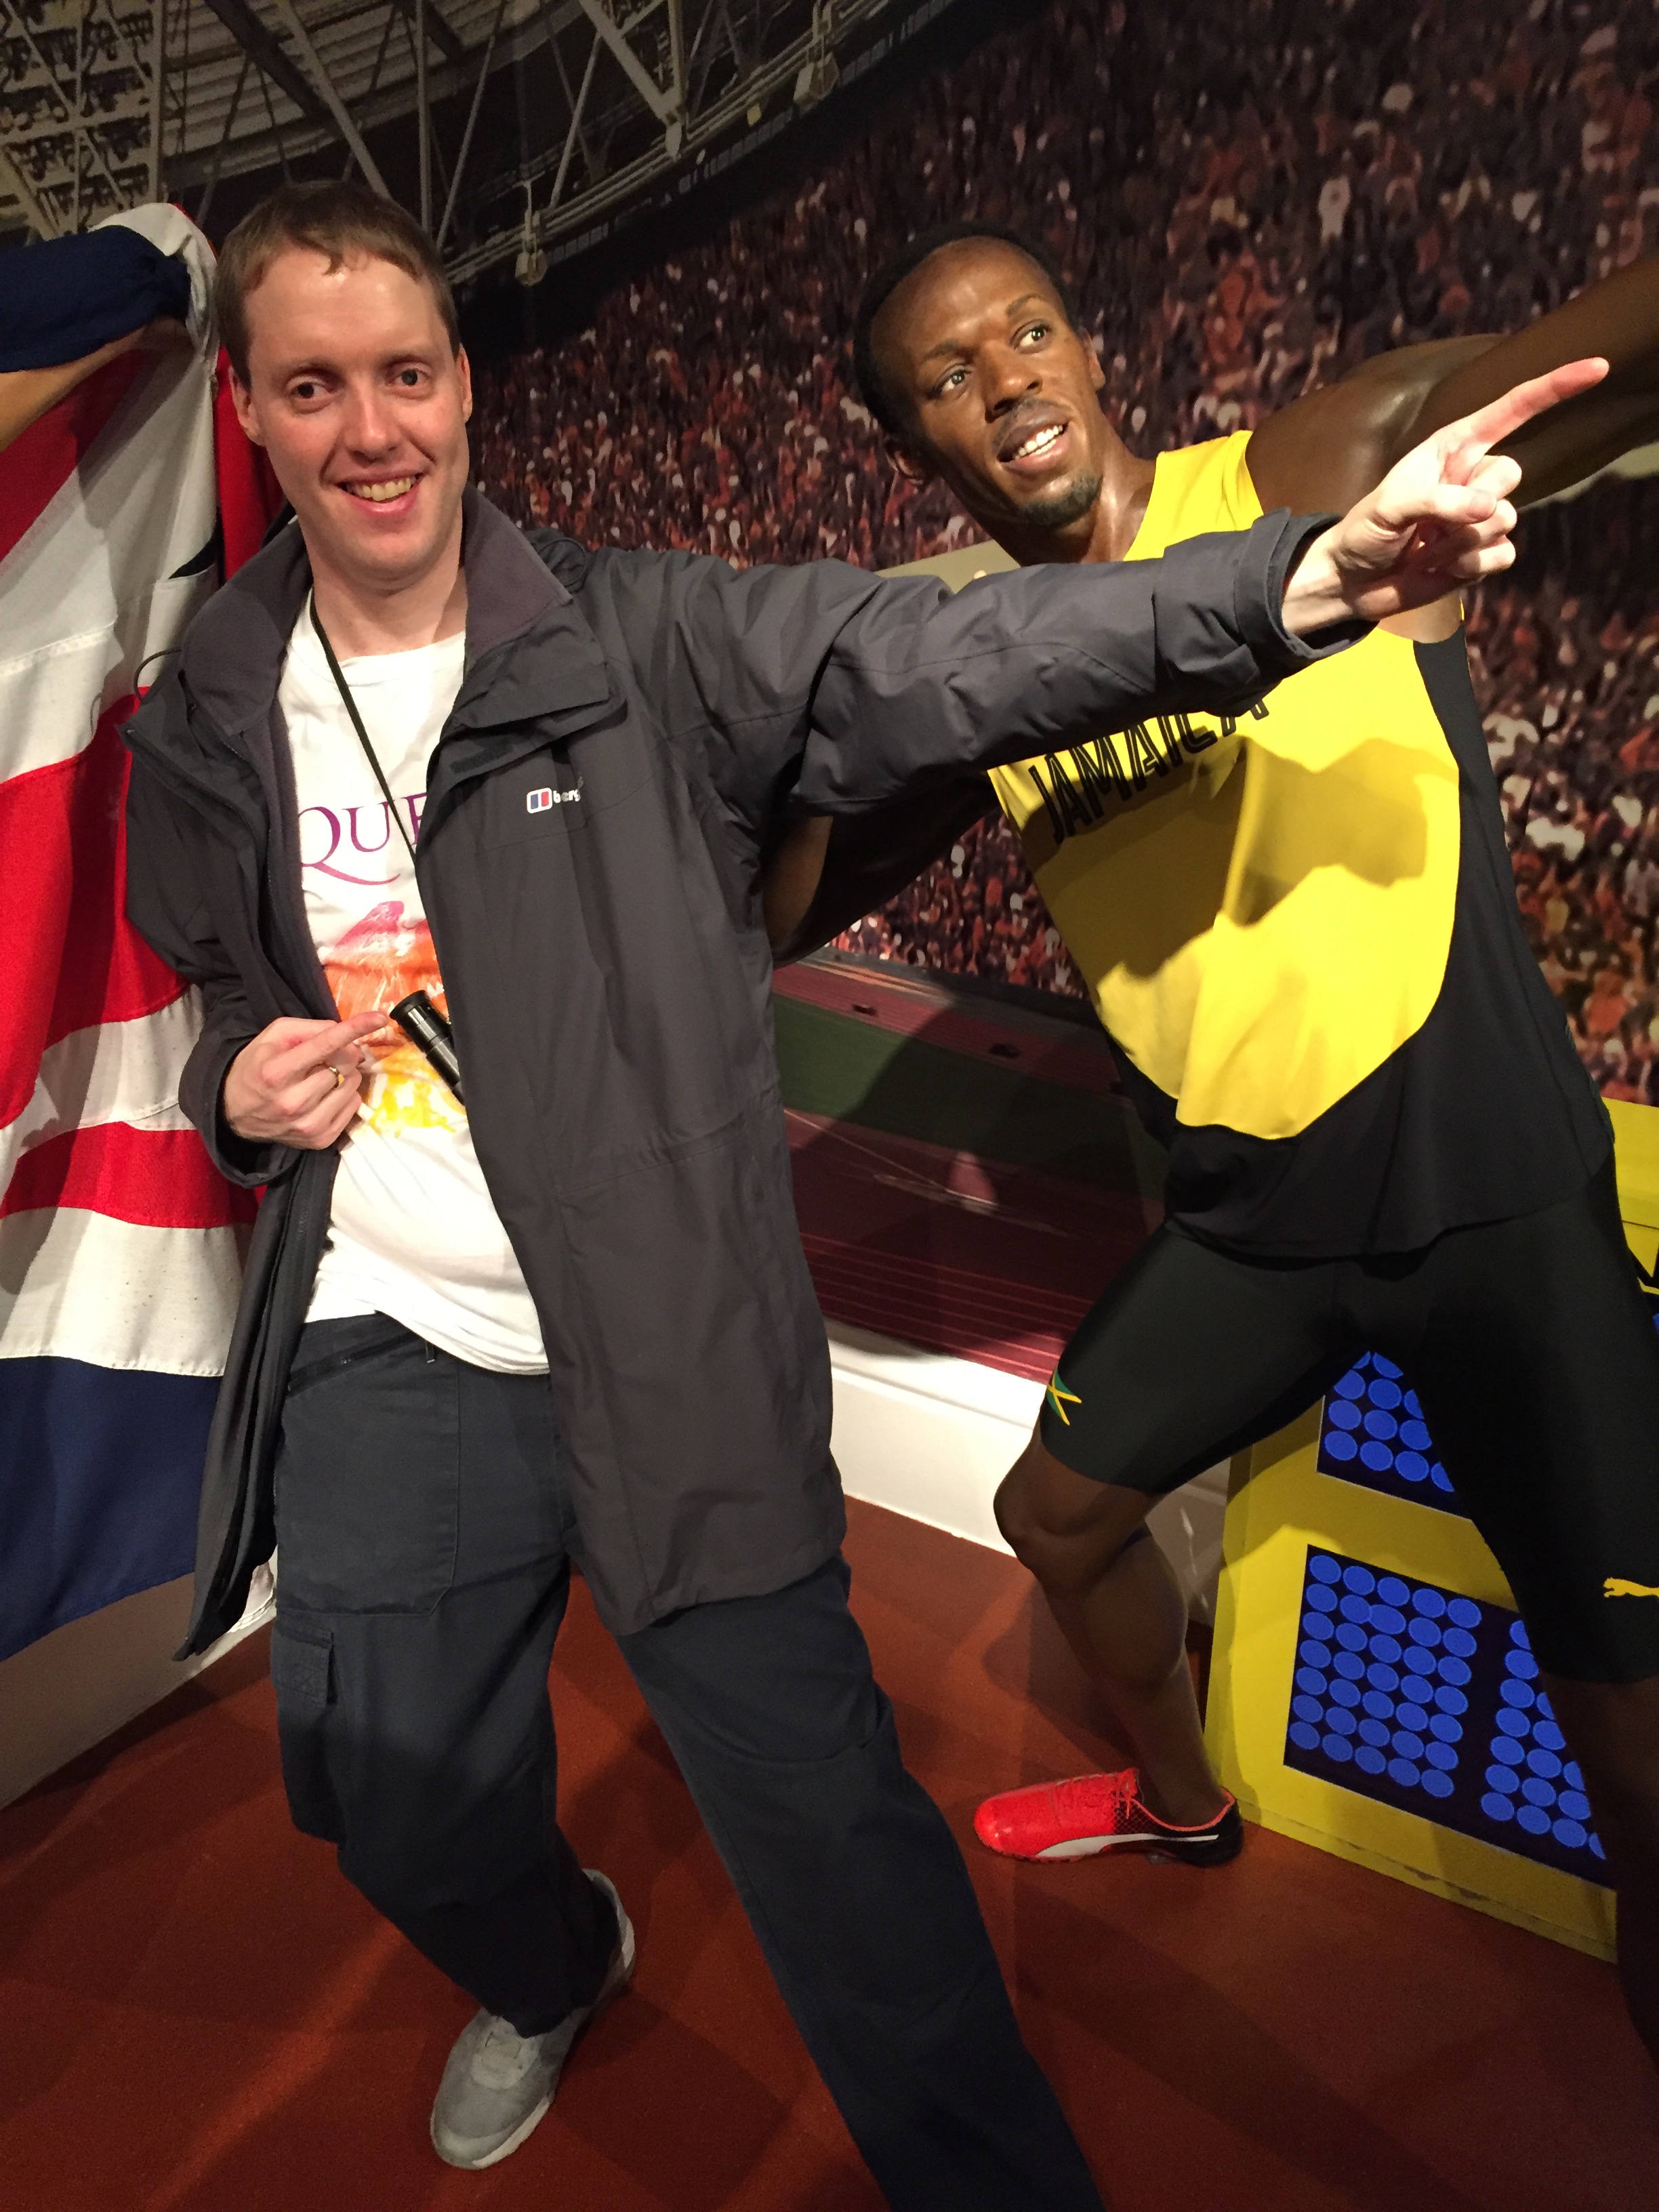 Glen next to Usain Bolt's waxwork at Madame Tussaud's, copying his lightning bolt pose where he leans on his back foot while pointing up and ahead with the opposite arm.